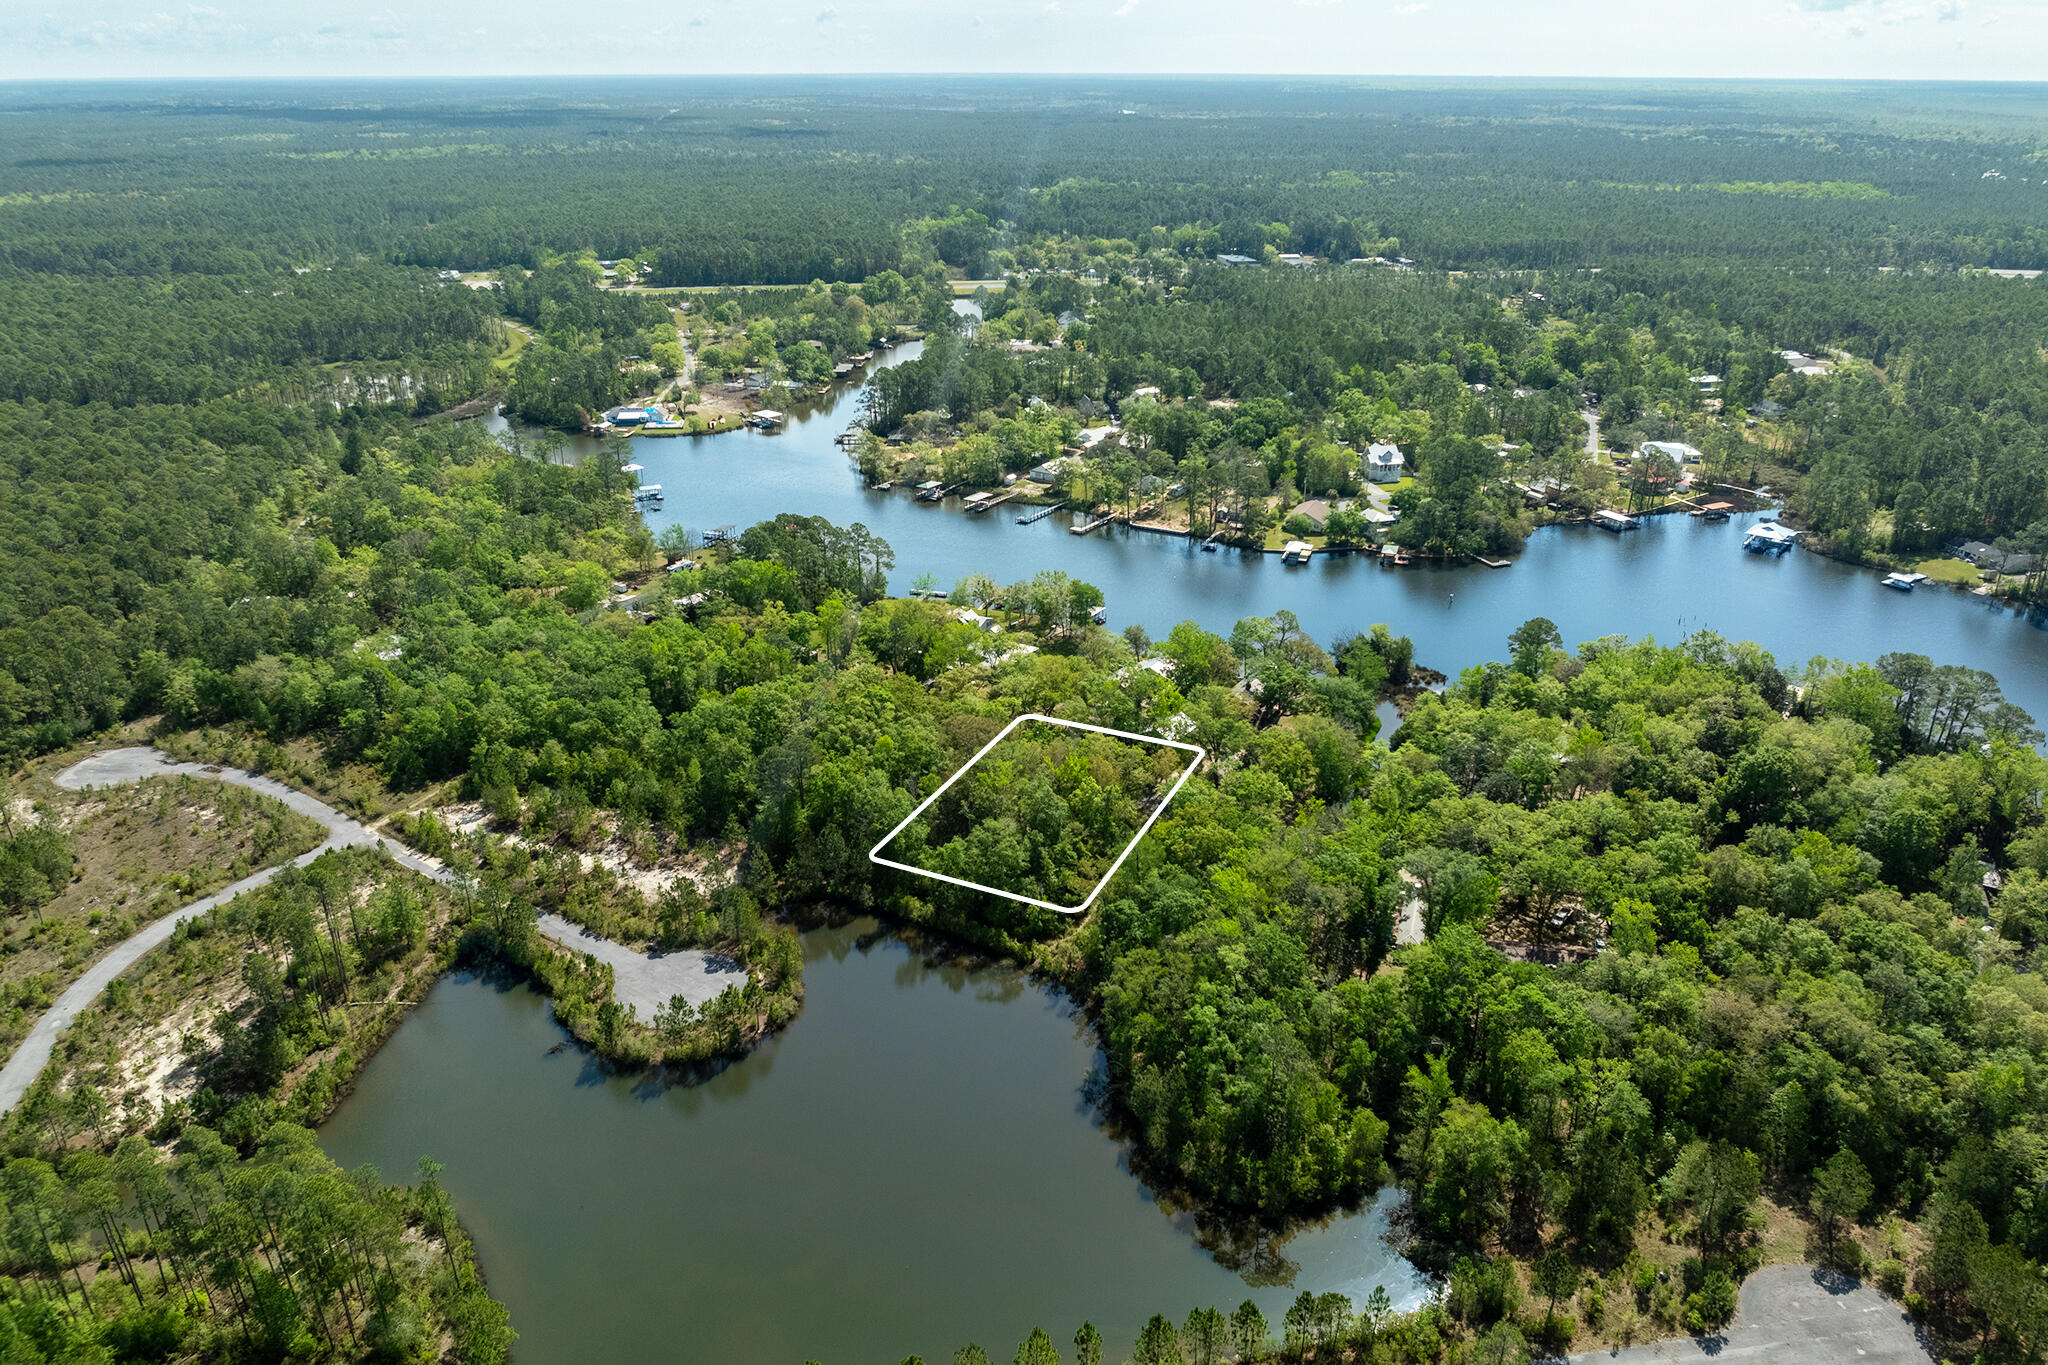 an aerial view of a houses with outdoor space and lake view